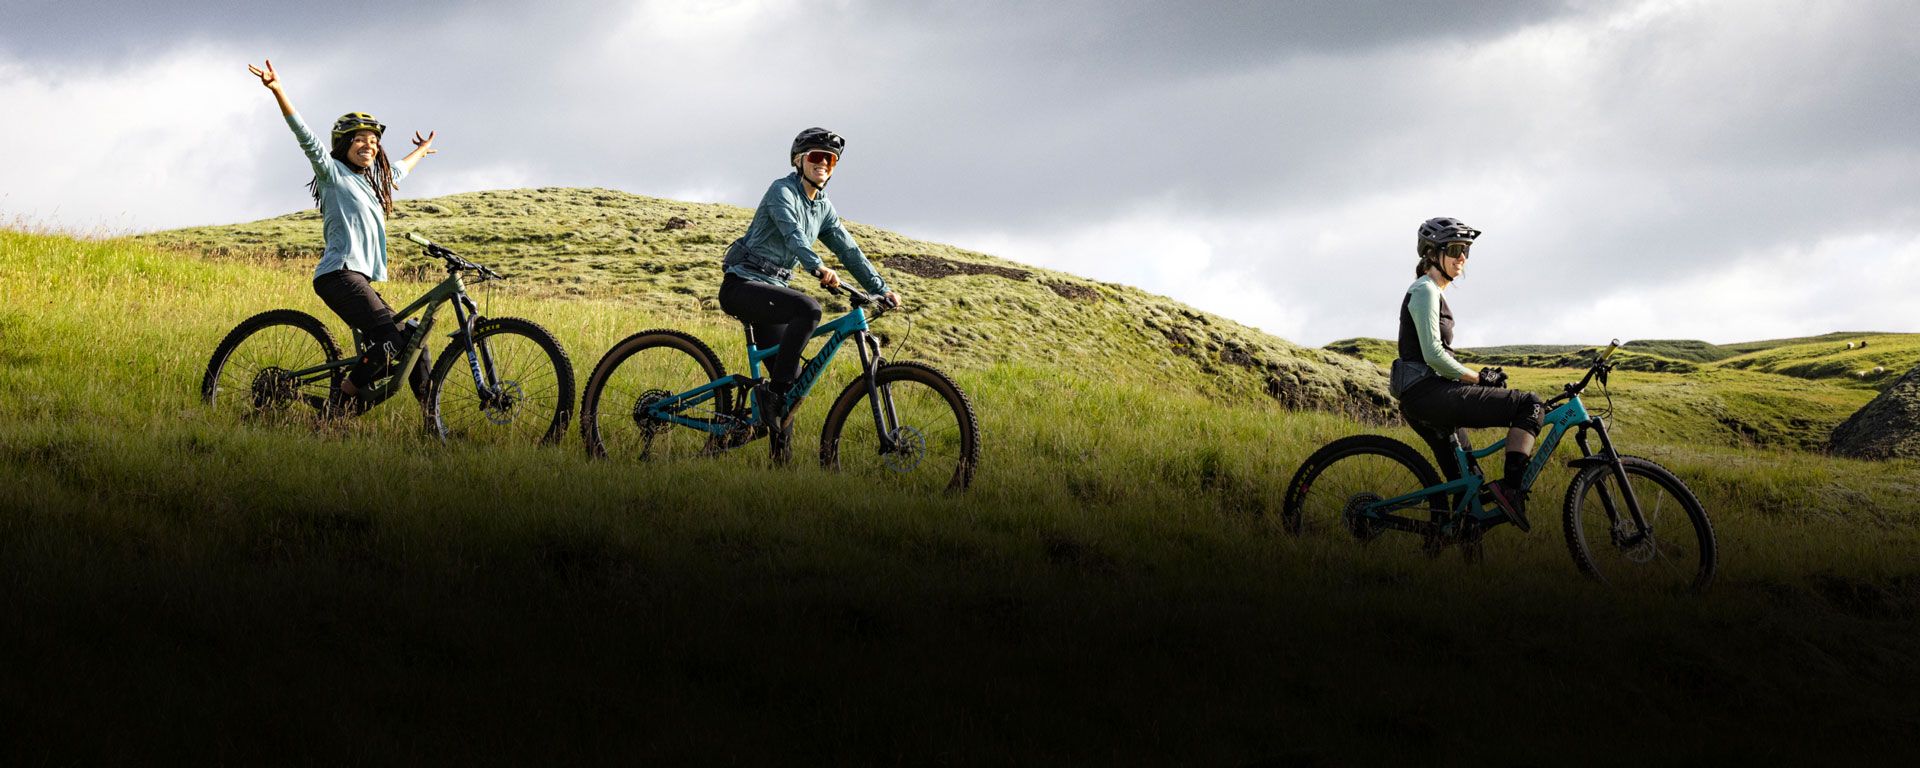 Two cyclists cycle down a grassy hill while one cyclist stands at the top holding out her arms.